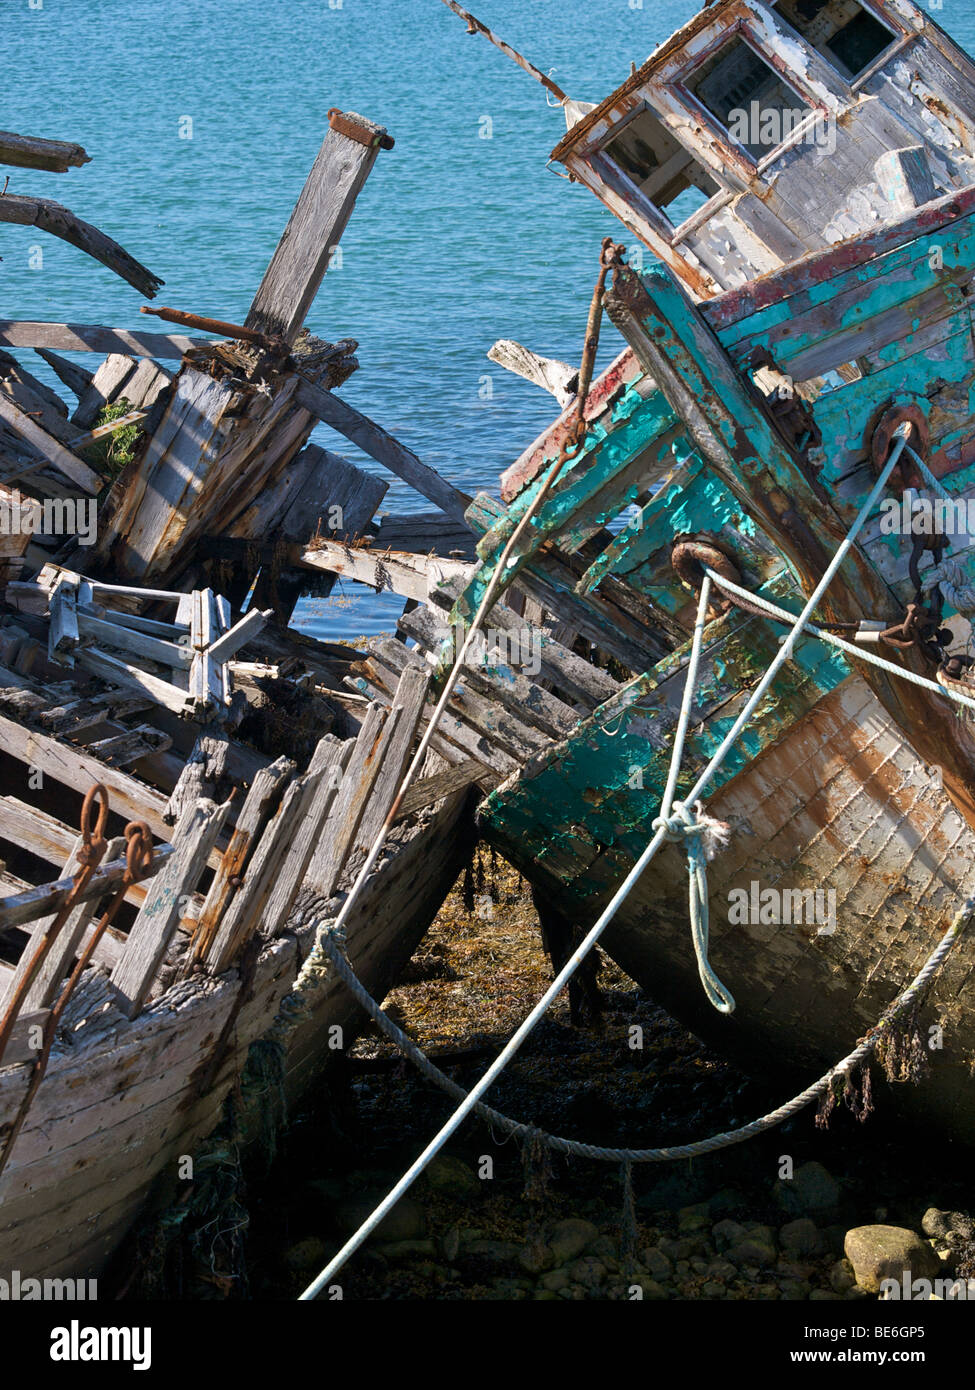 Fishing boat shipwrecks on the shore in the port of Camaret Sur Mer, Brittany, France Stock Photo